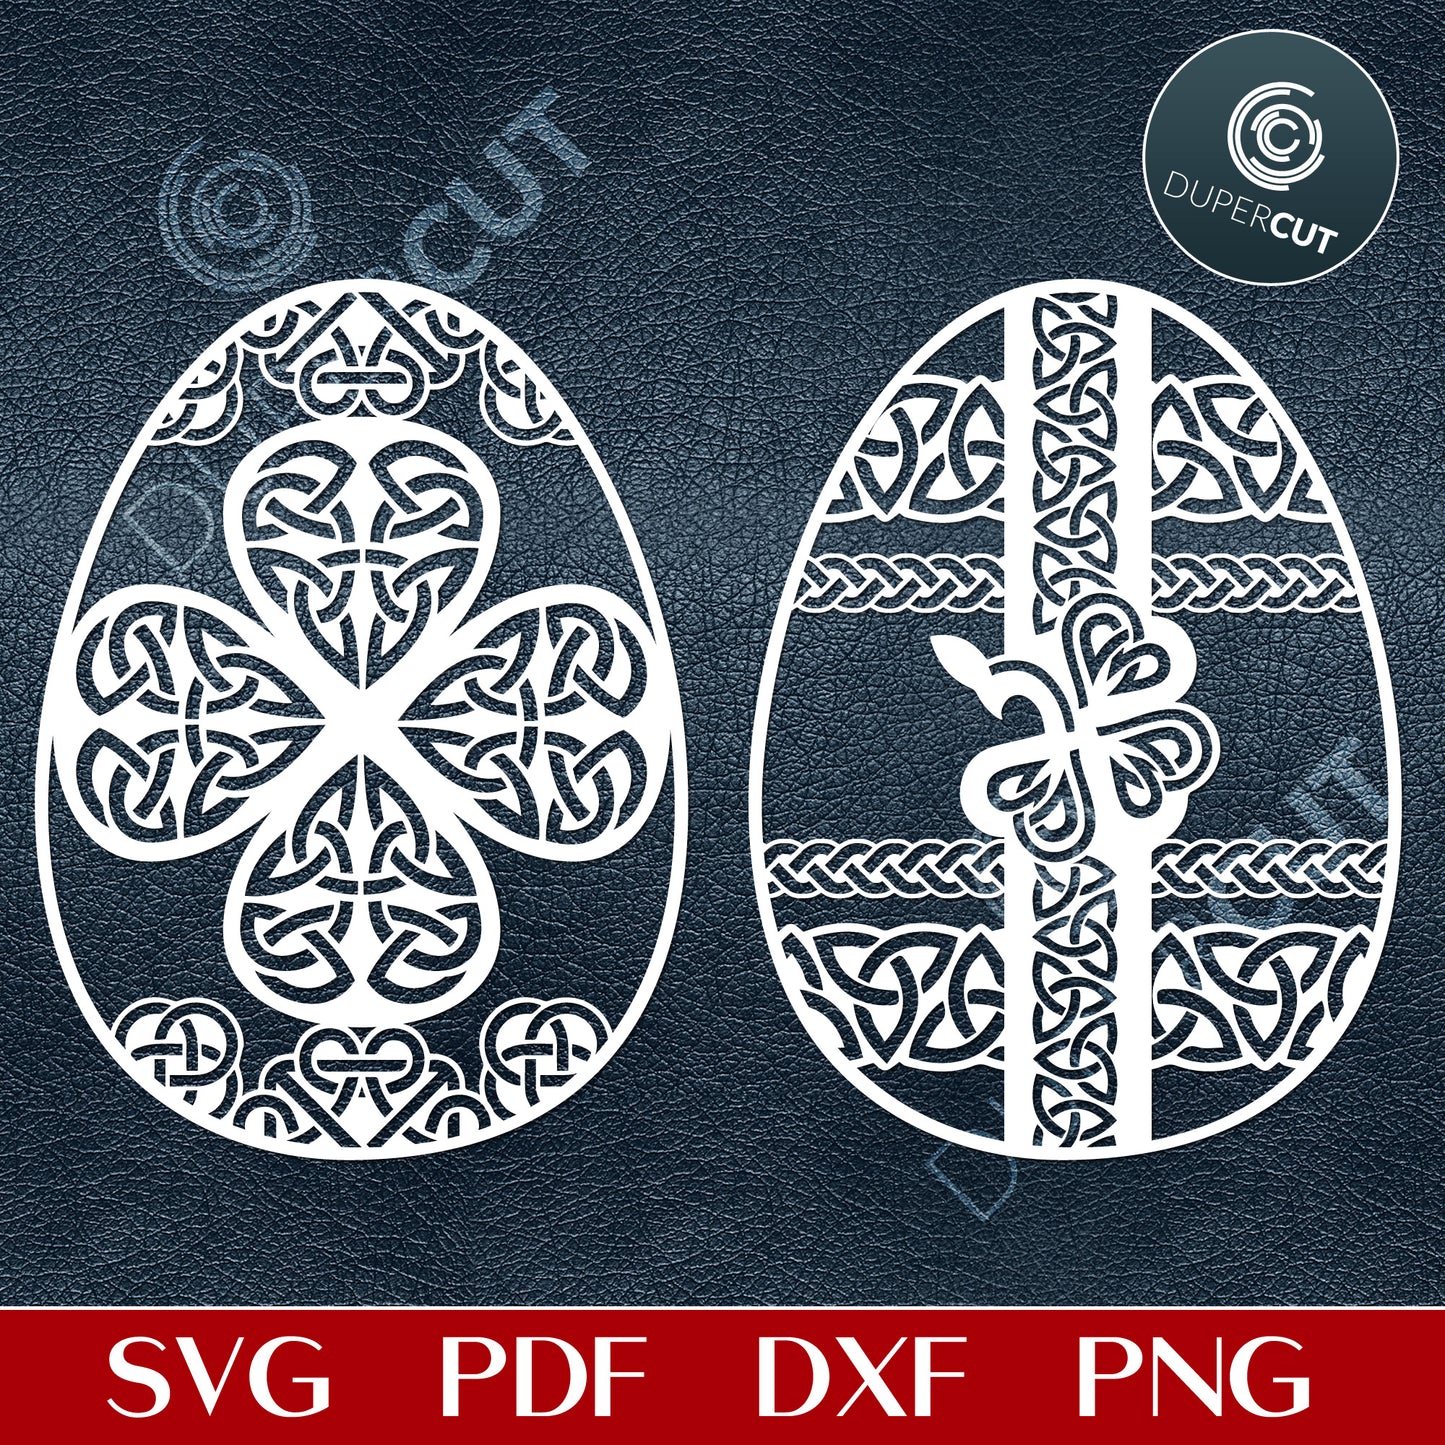 Celtic Irish easter eggs template - SVG DXF PNG vector files for laser and CNC machines, Cricut, Silhouette Cameo, Glowforge projects. 